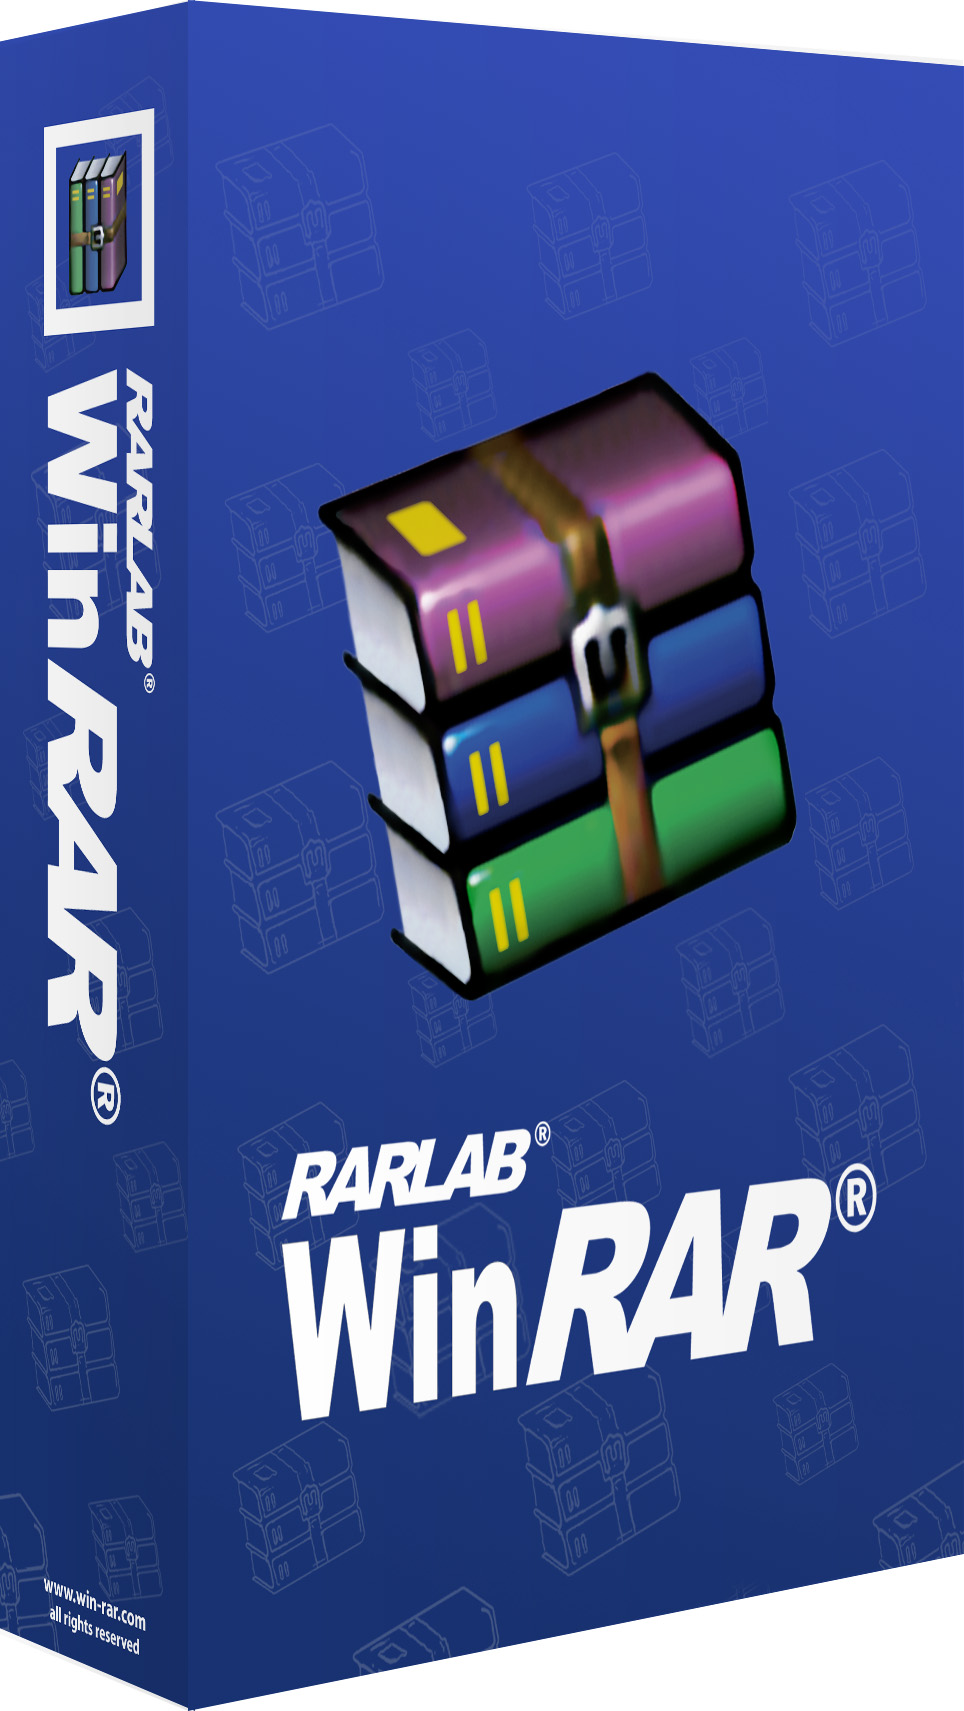 winrar 4.0 free download for windows 7